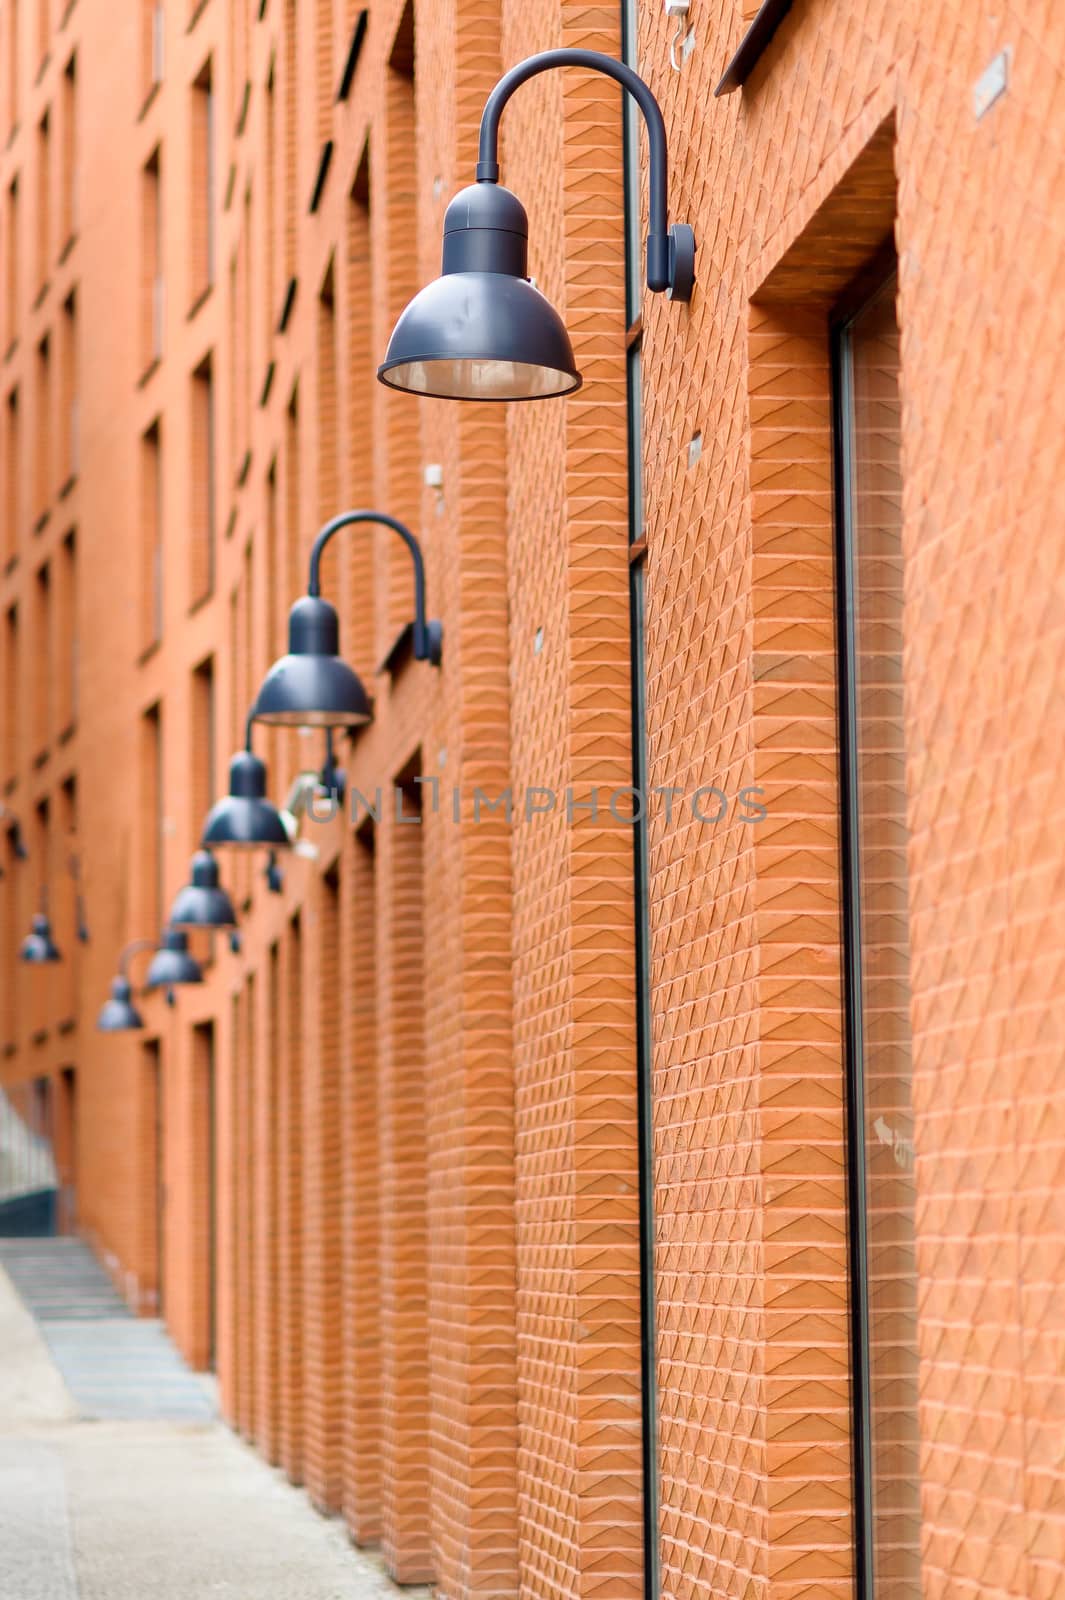 Frontage of modern red brick  building ith visible fragments of windows and black street lamps, linear perspective.